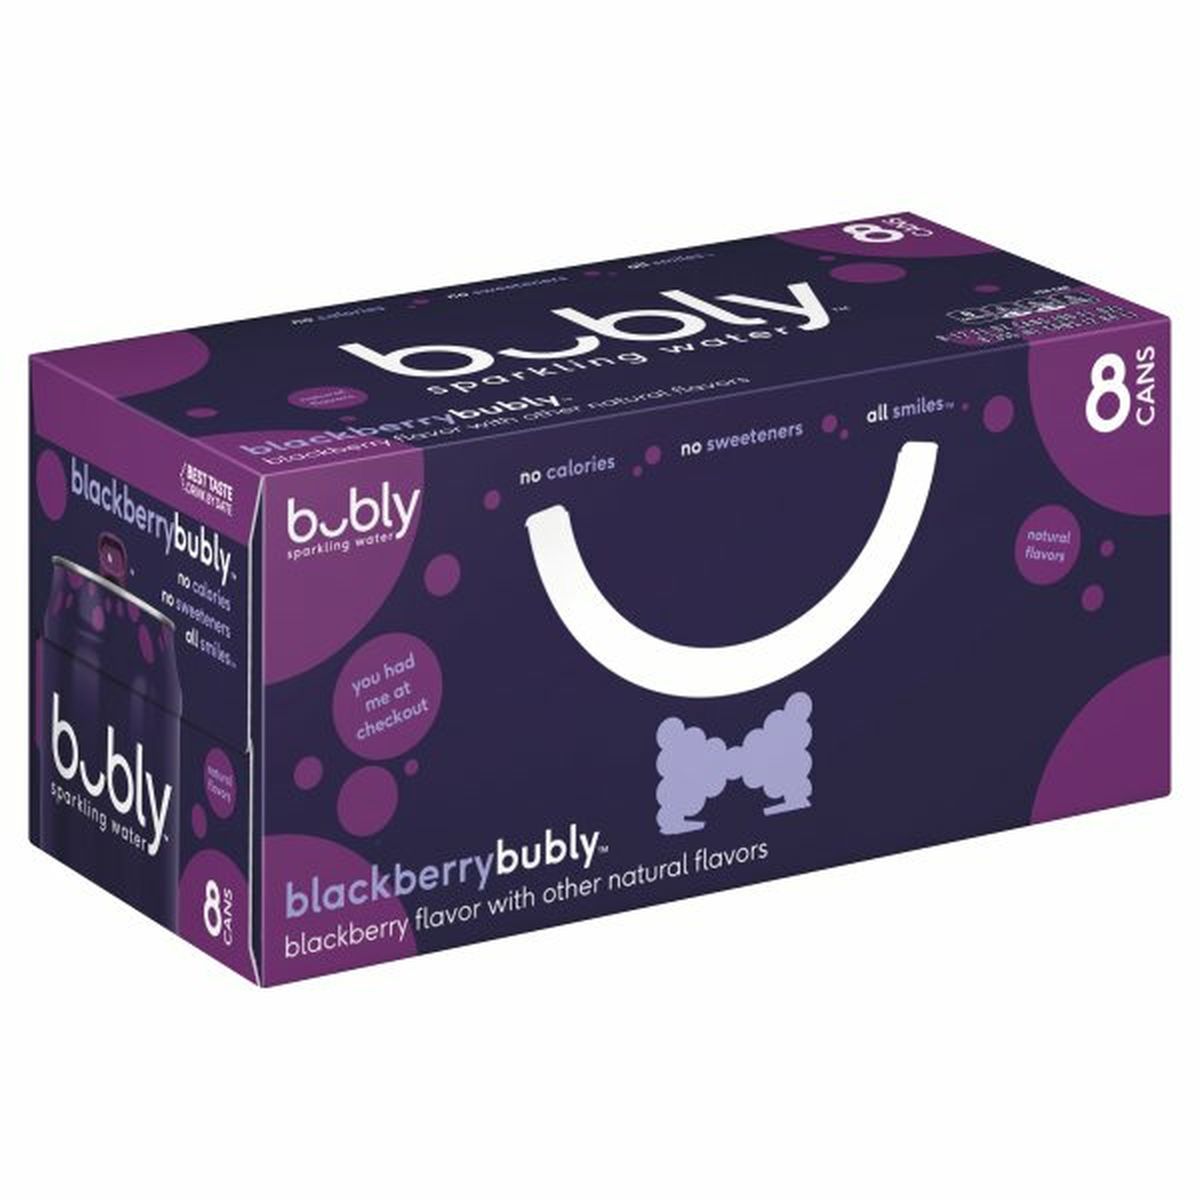 Calories in bubly Sparkling Water Flavored Water, Blackberry Flavored